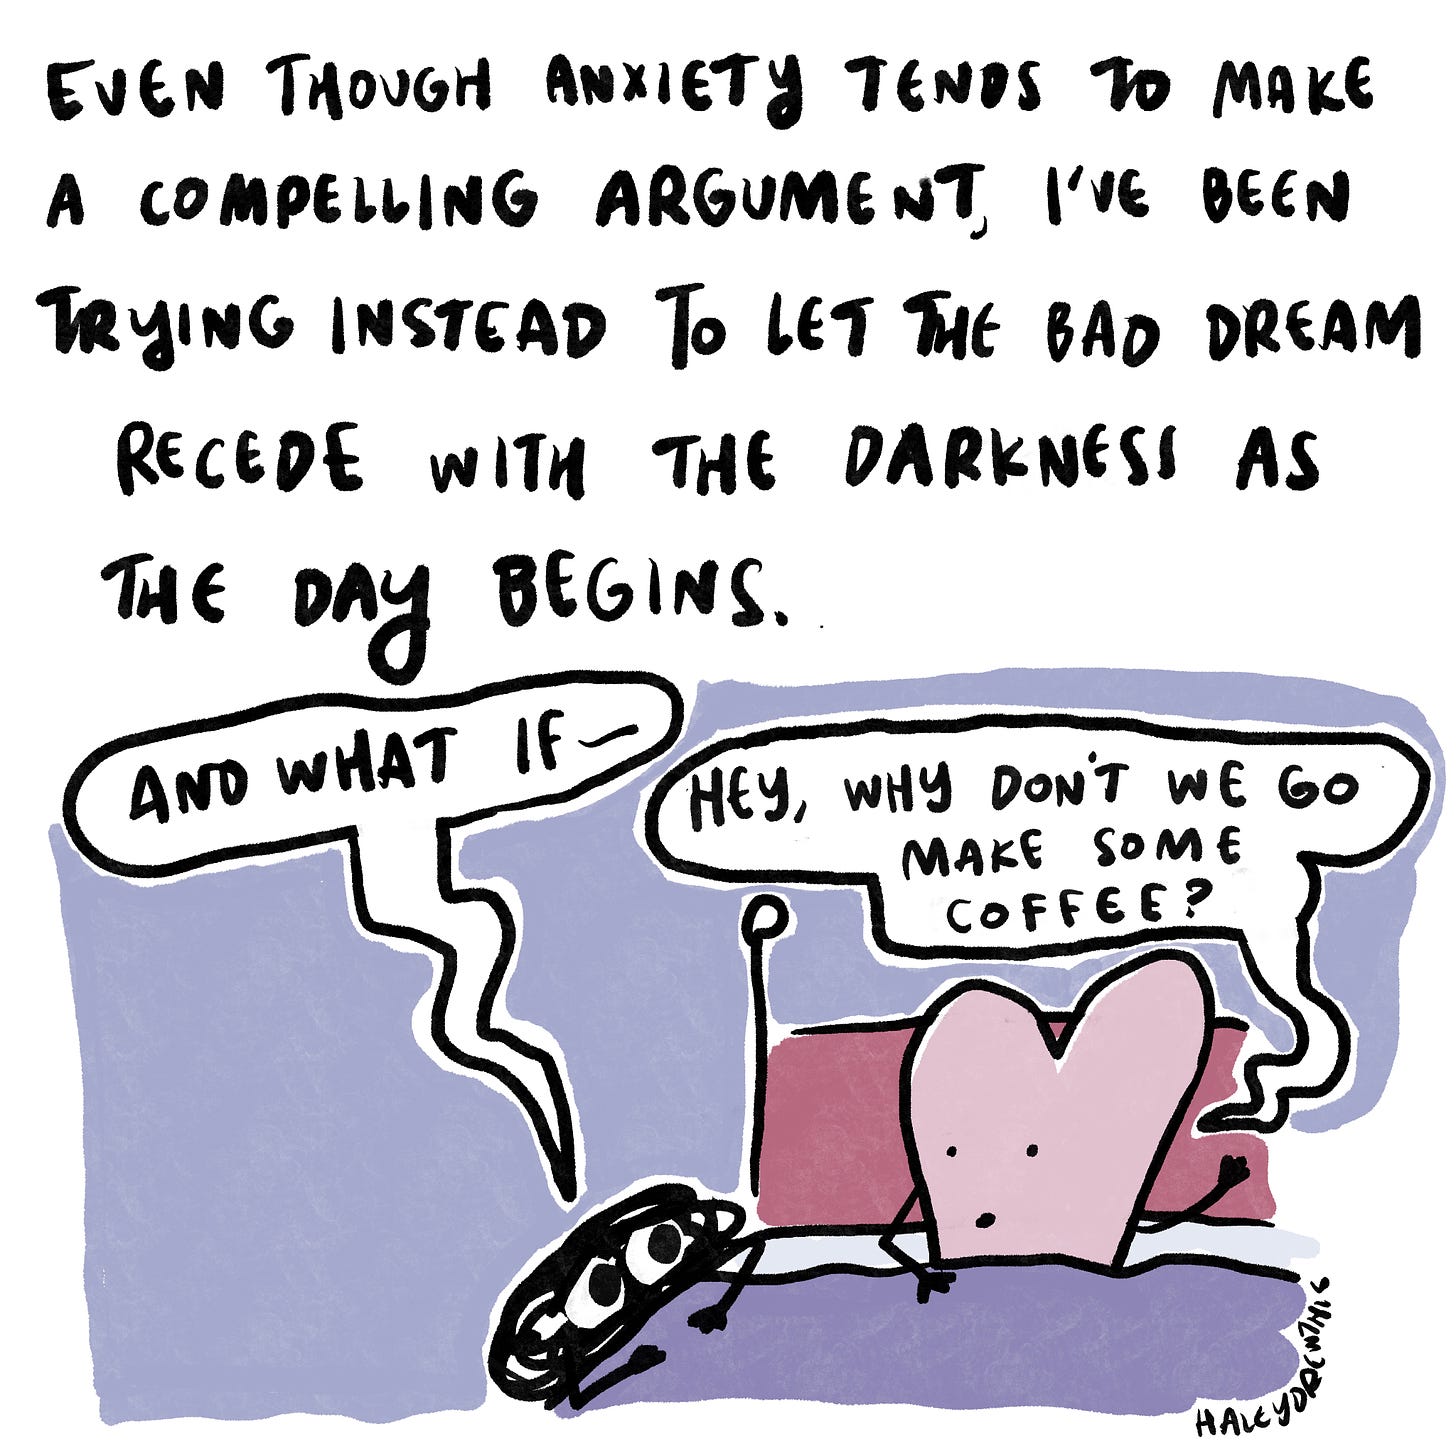 Even though Anxiety tends to make a compelling argument, I’ve been trying to instead let the bad dream sit for a moment, and then allow it to recede with the darkness as the day begins. 